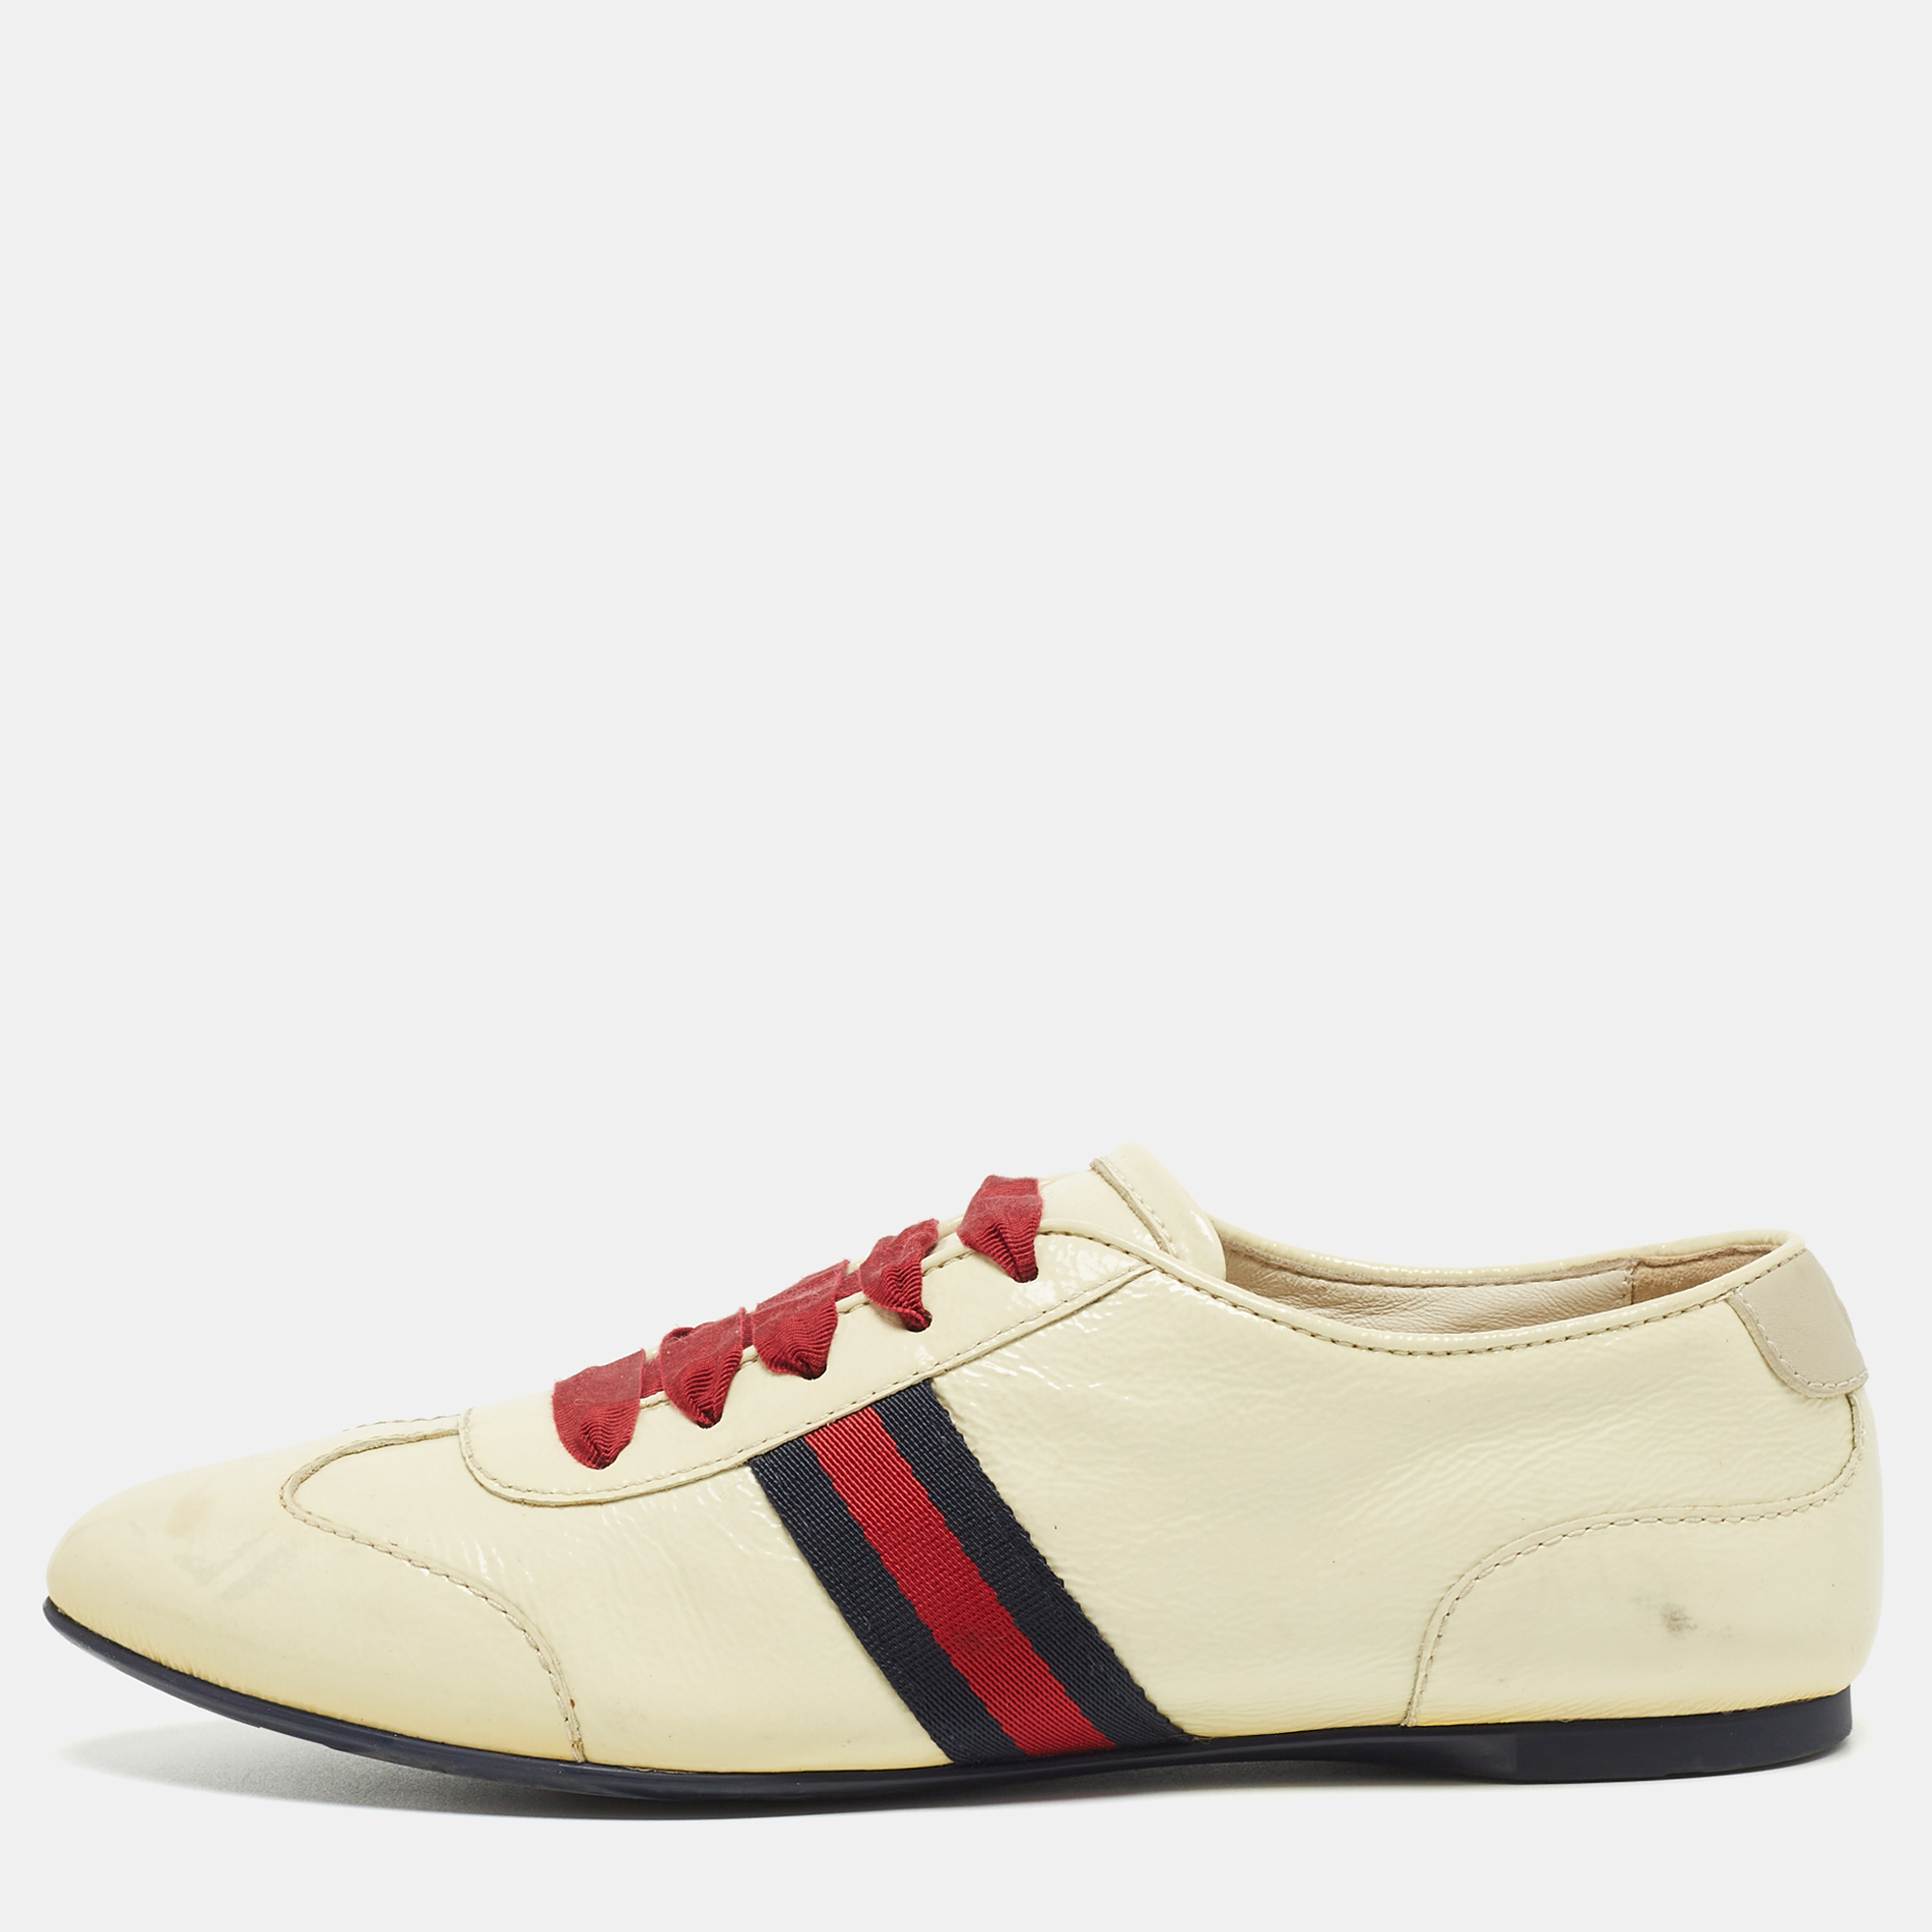 Gucci cream patent leather web lace up sneakers size 35